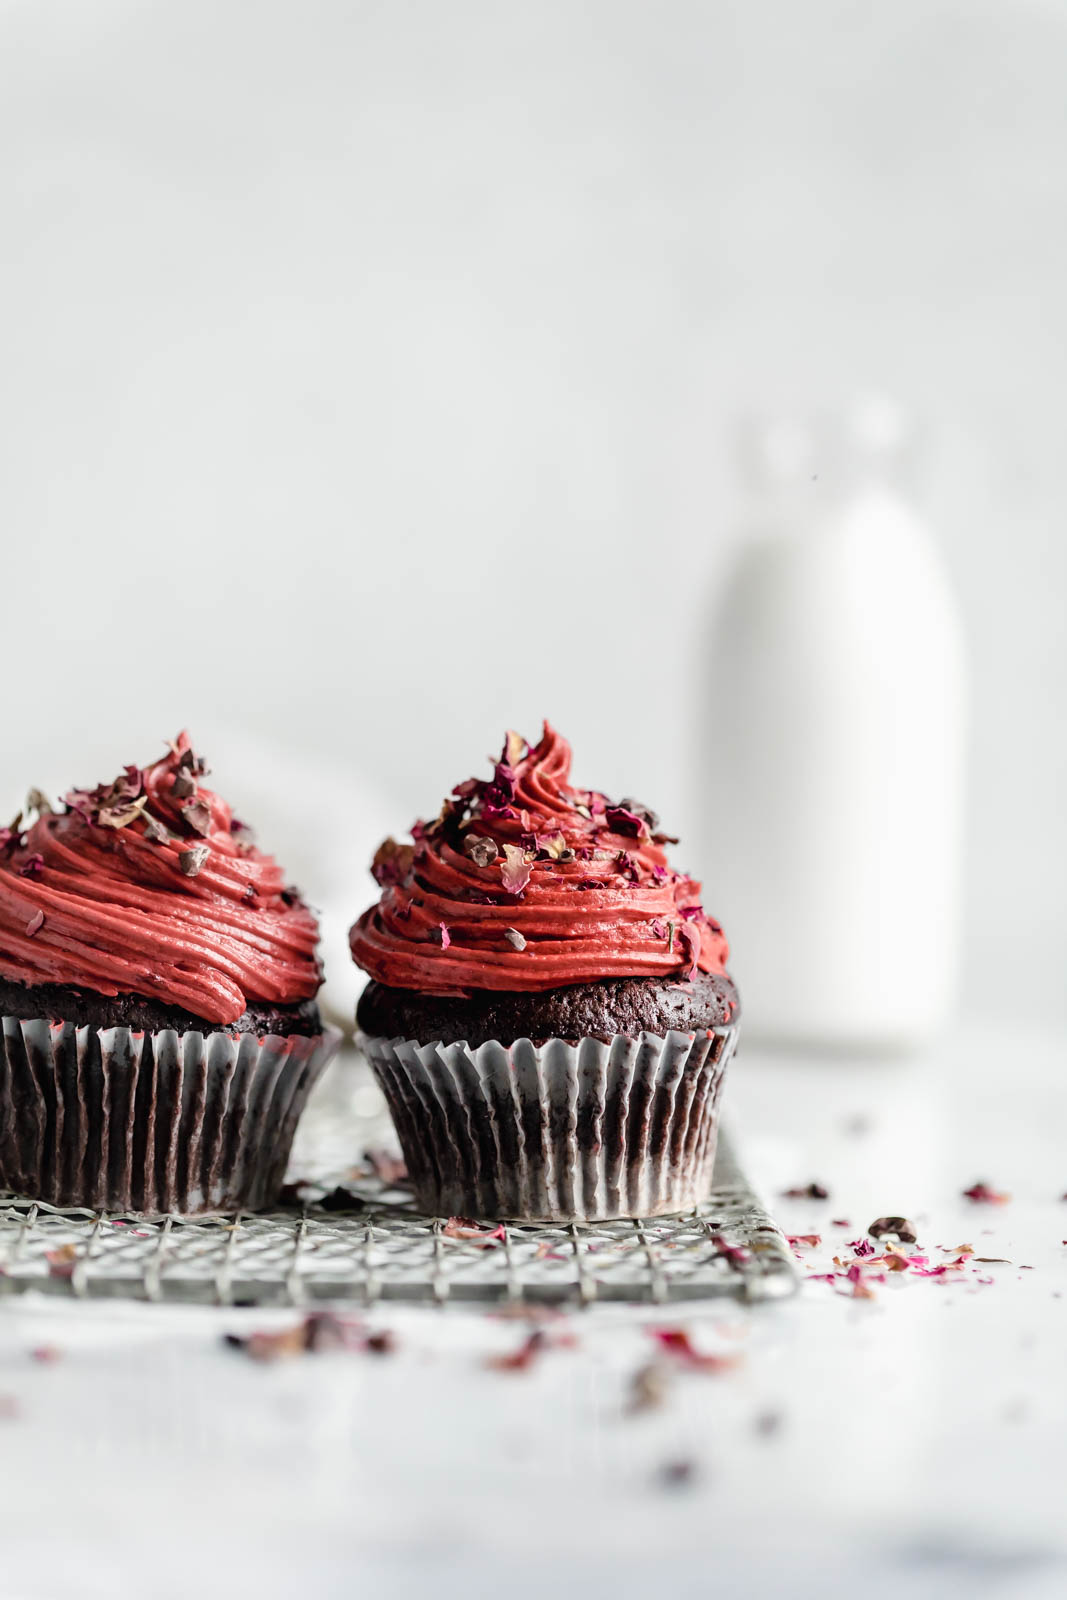 Raspberry Rose Chocolate Cupcakes for Two: one for you, one for your boo. Or two for you, because no one is judging here!